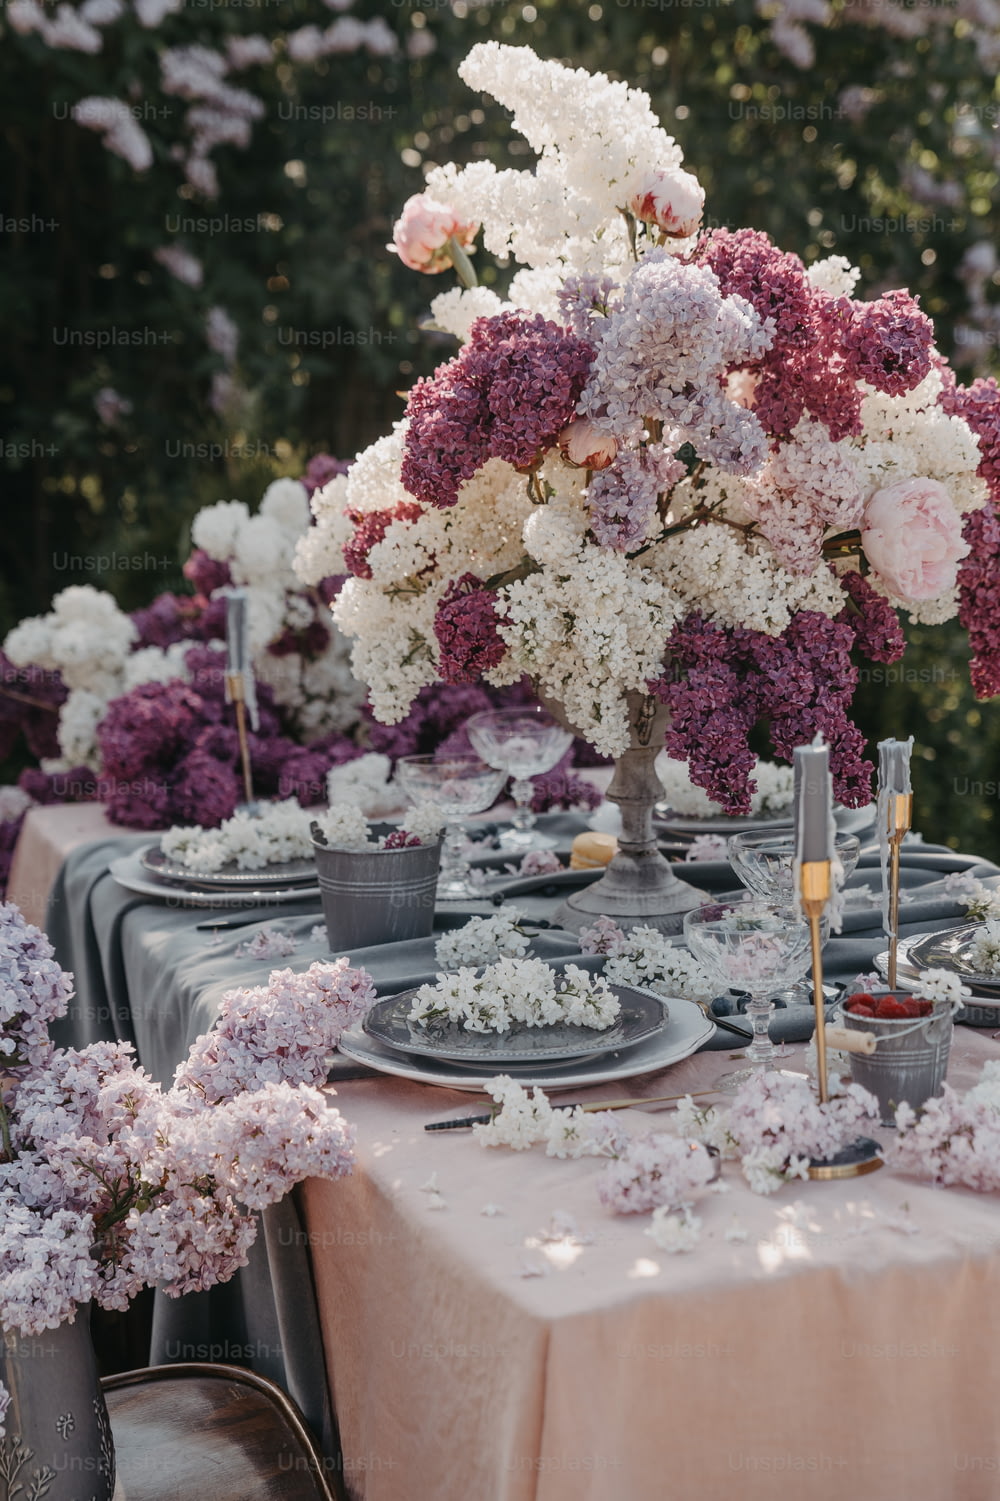 a table is set with plates and flowers